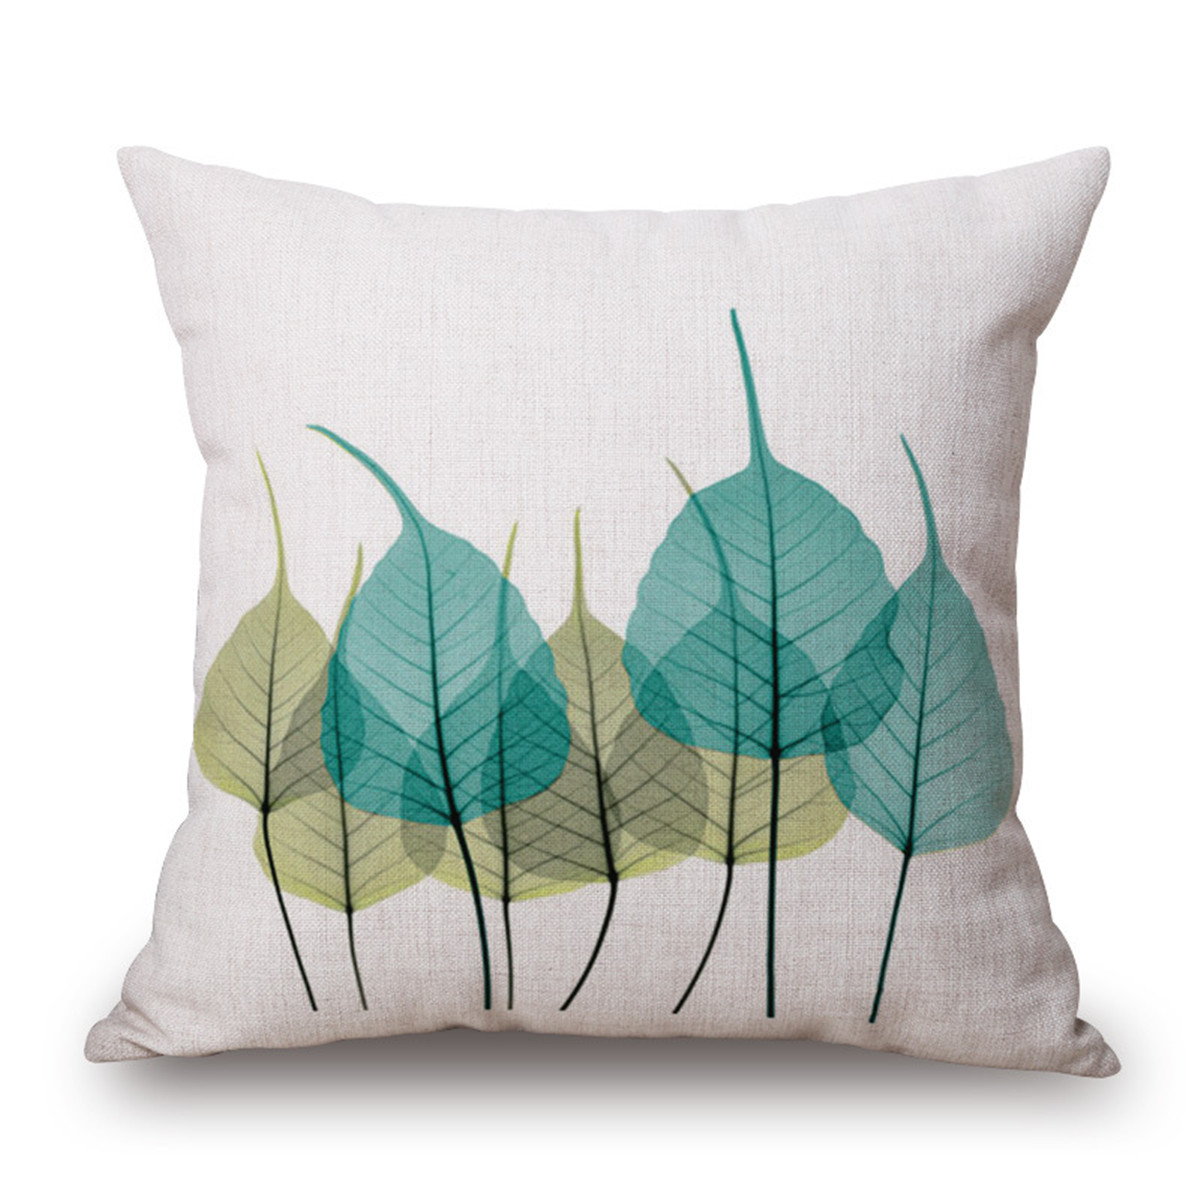 Ink-Painting-Flowers-Cotton-Linen-Pillow-Case-Tulips-Sofa-Cushion-Cover-45x45cm-1161674-11